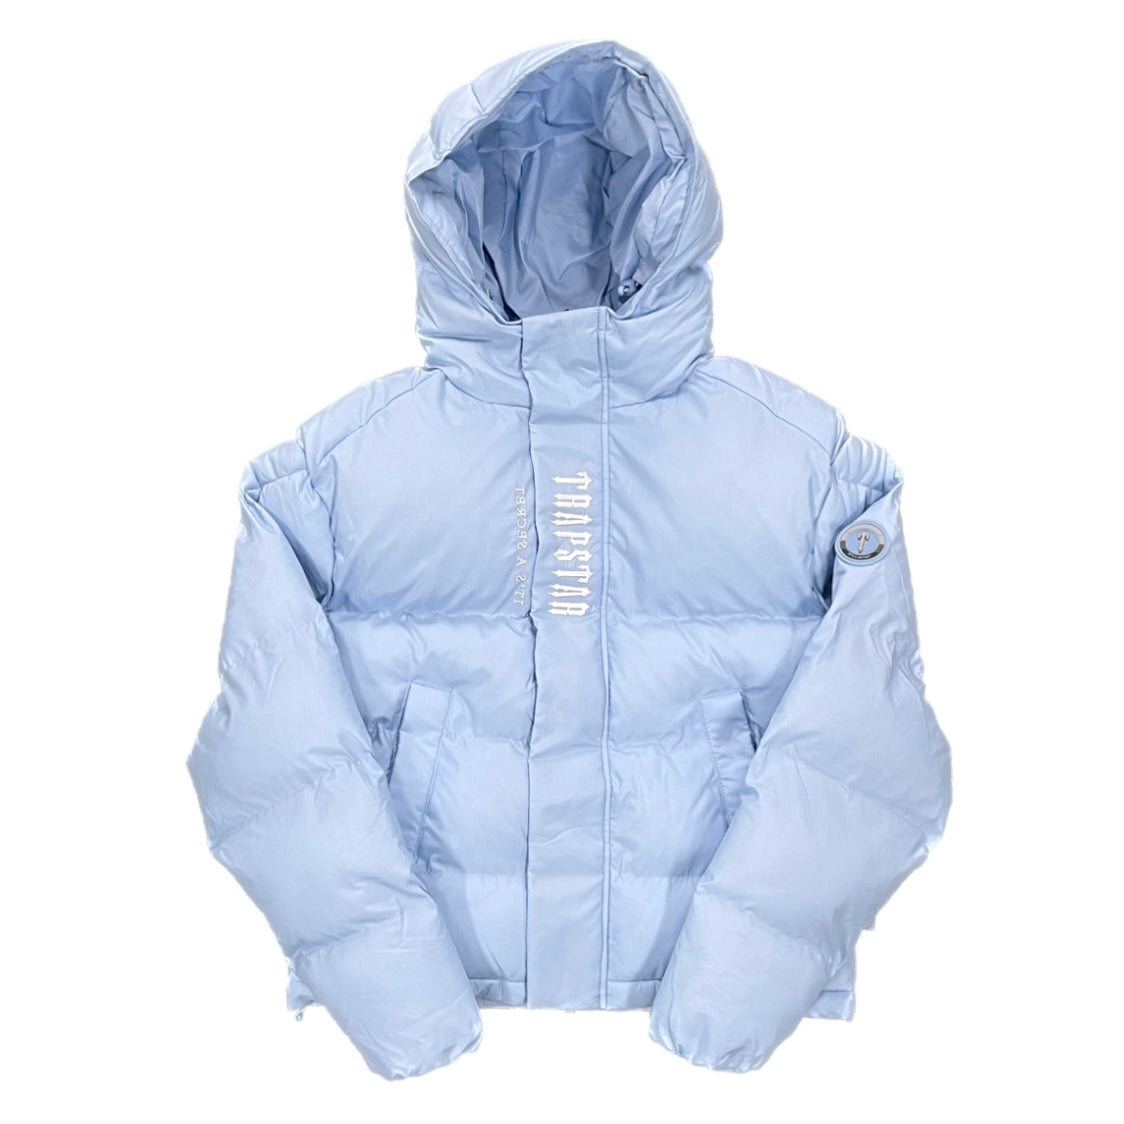 TRAPSTAR HOODED PUFFER 2.0 JACKET - ICE BLUE